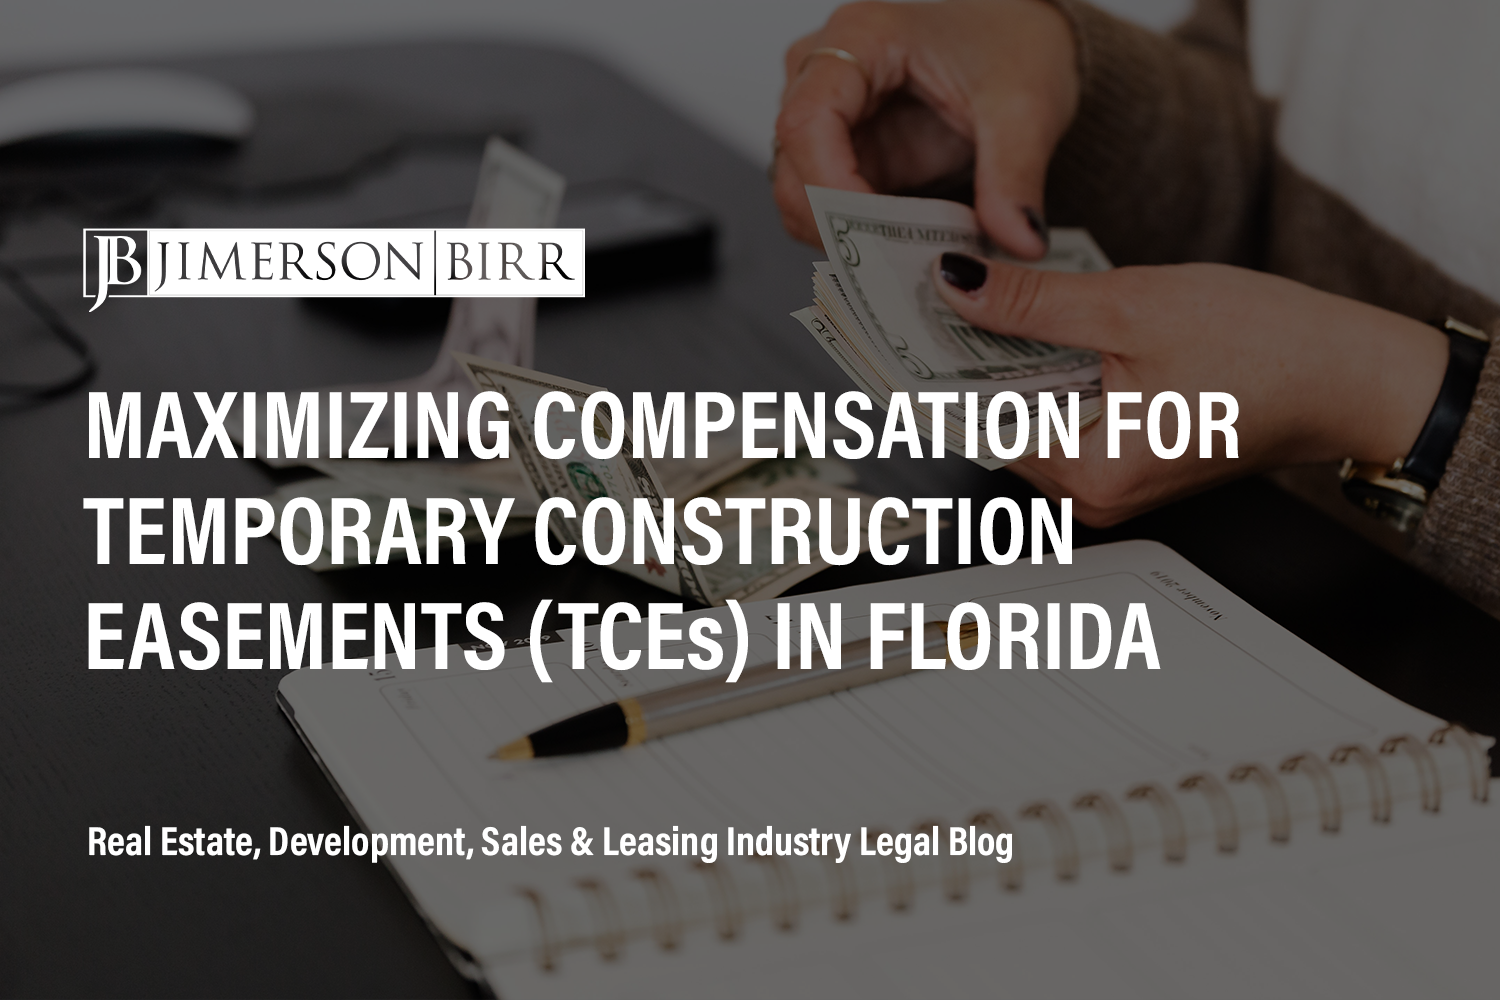 Maximizing Compensation for Temporary Construction Easements (TCEs) in Florida